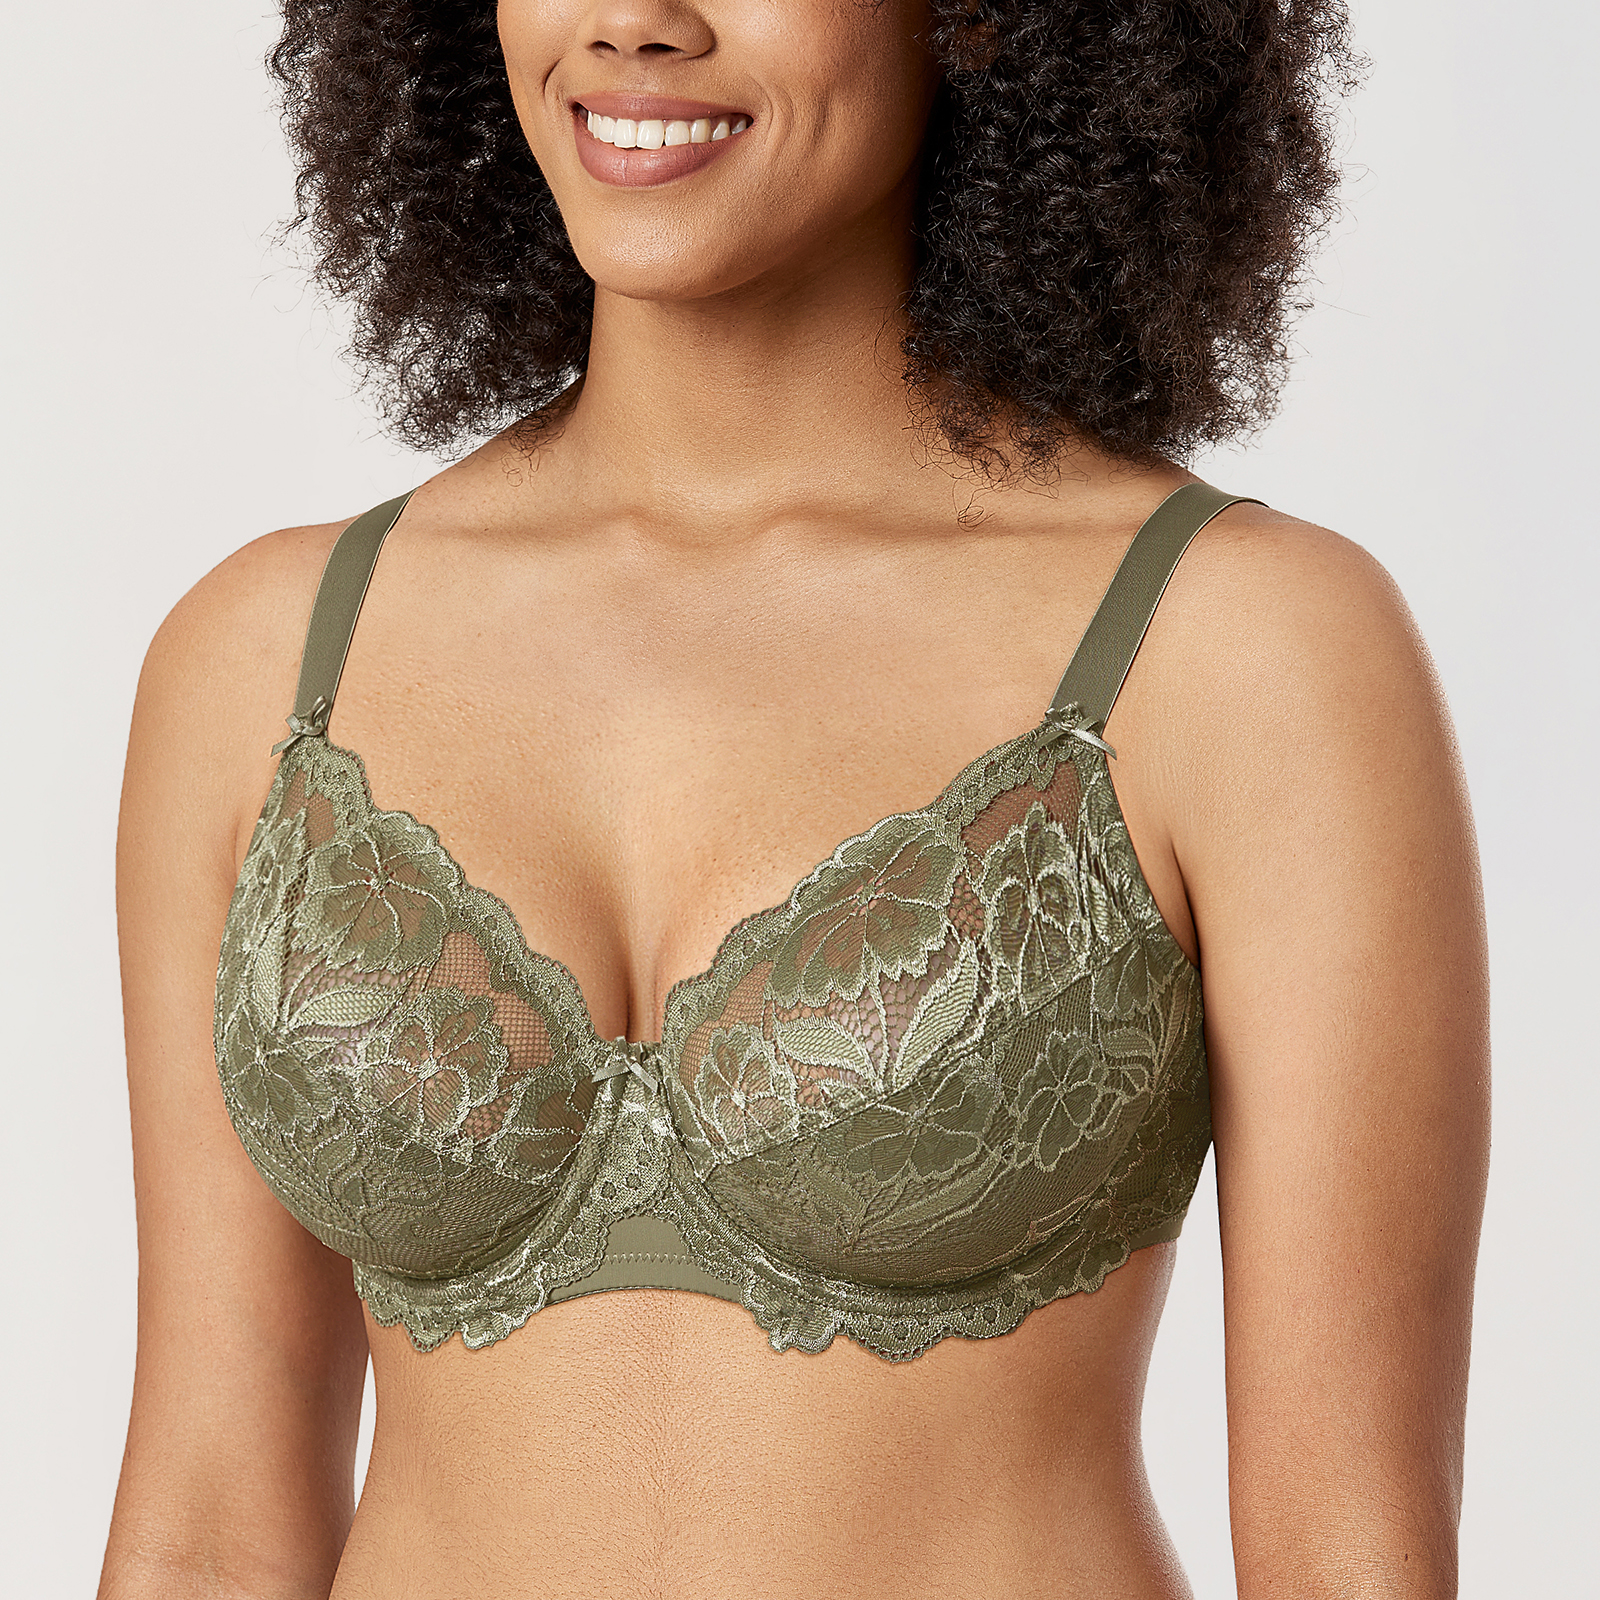 DELIMIRA Women's Plus Size up to J Cup Lace Underwire Full Coverage Unlined  Bra